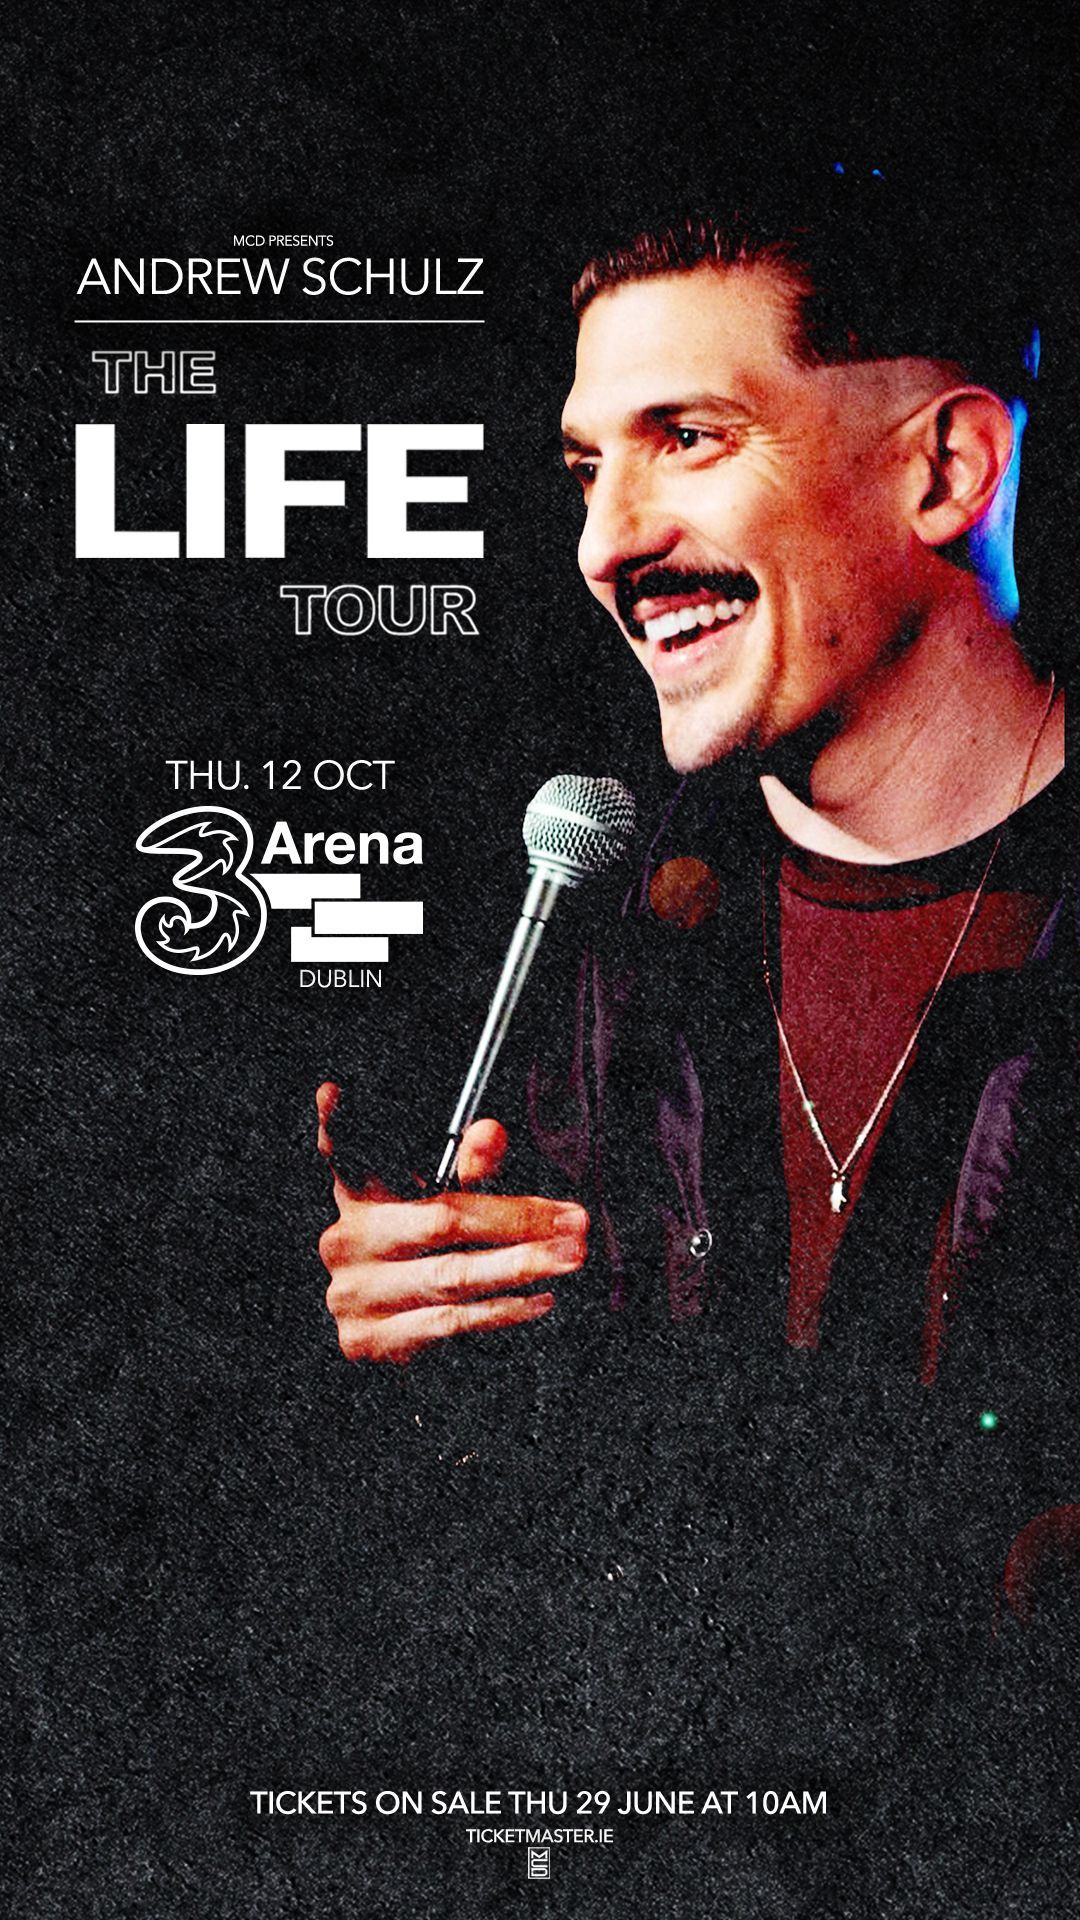 Andrew Schulz The Life Tour 3Arena Dublin Date Confirmed